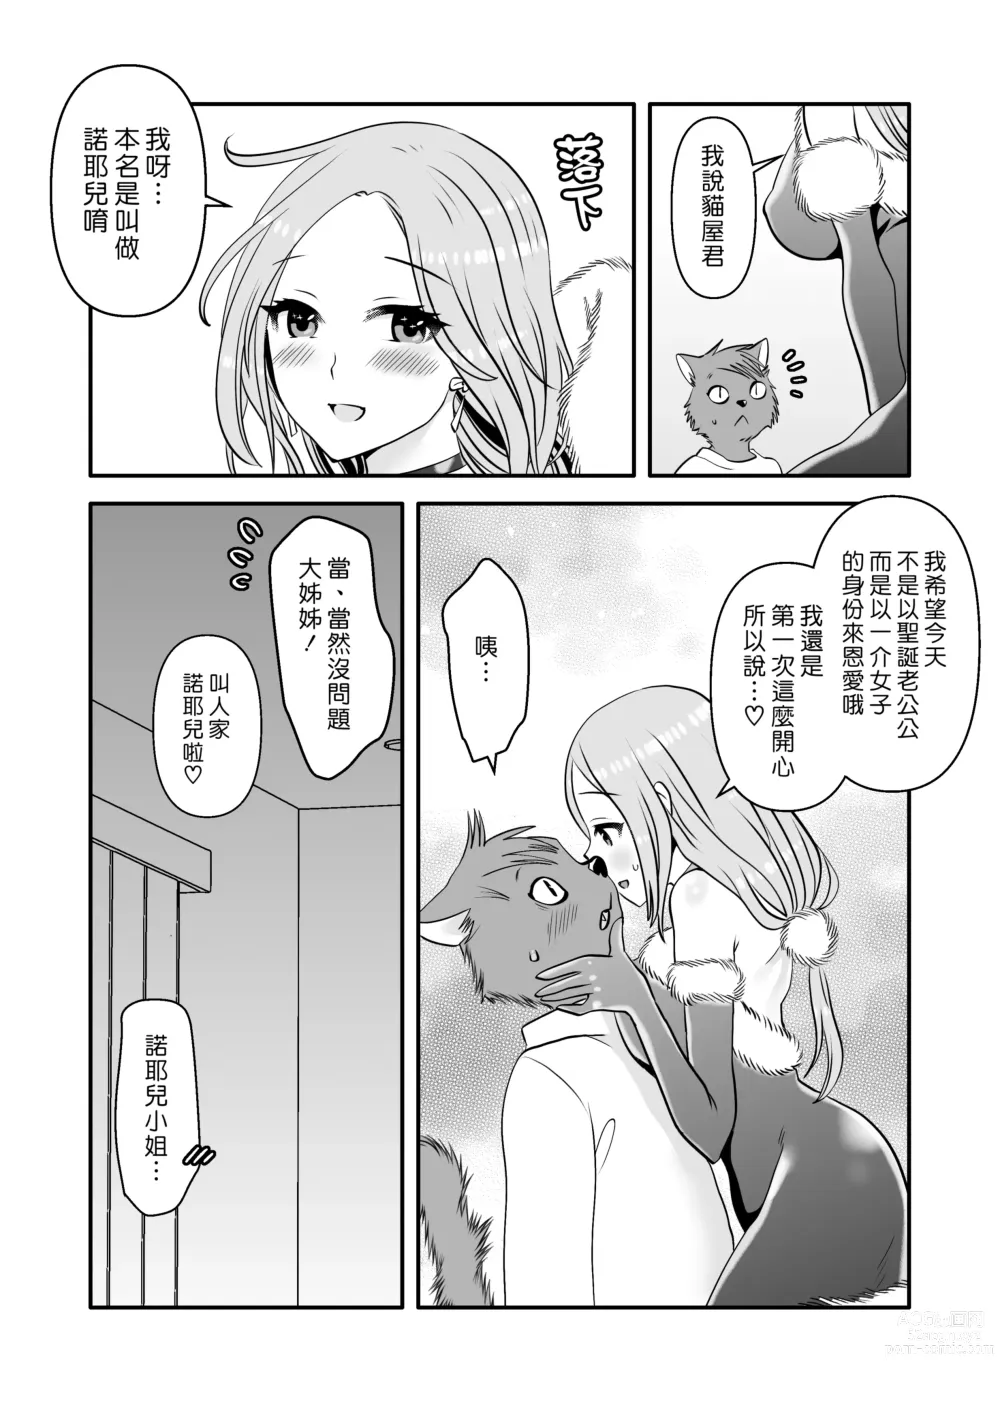 Page 24 of doujinshi 獸人君與聖誕大姊姊